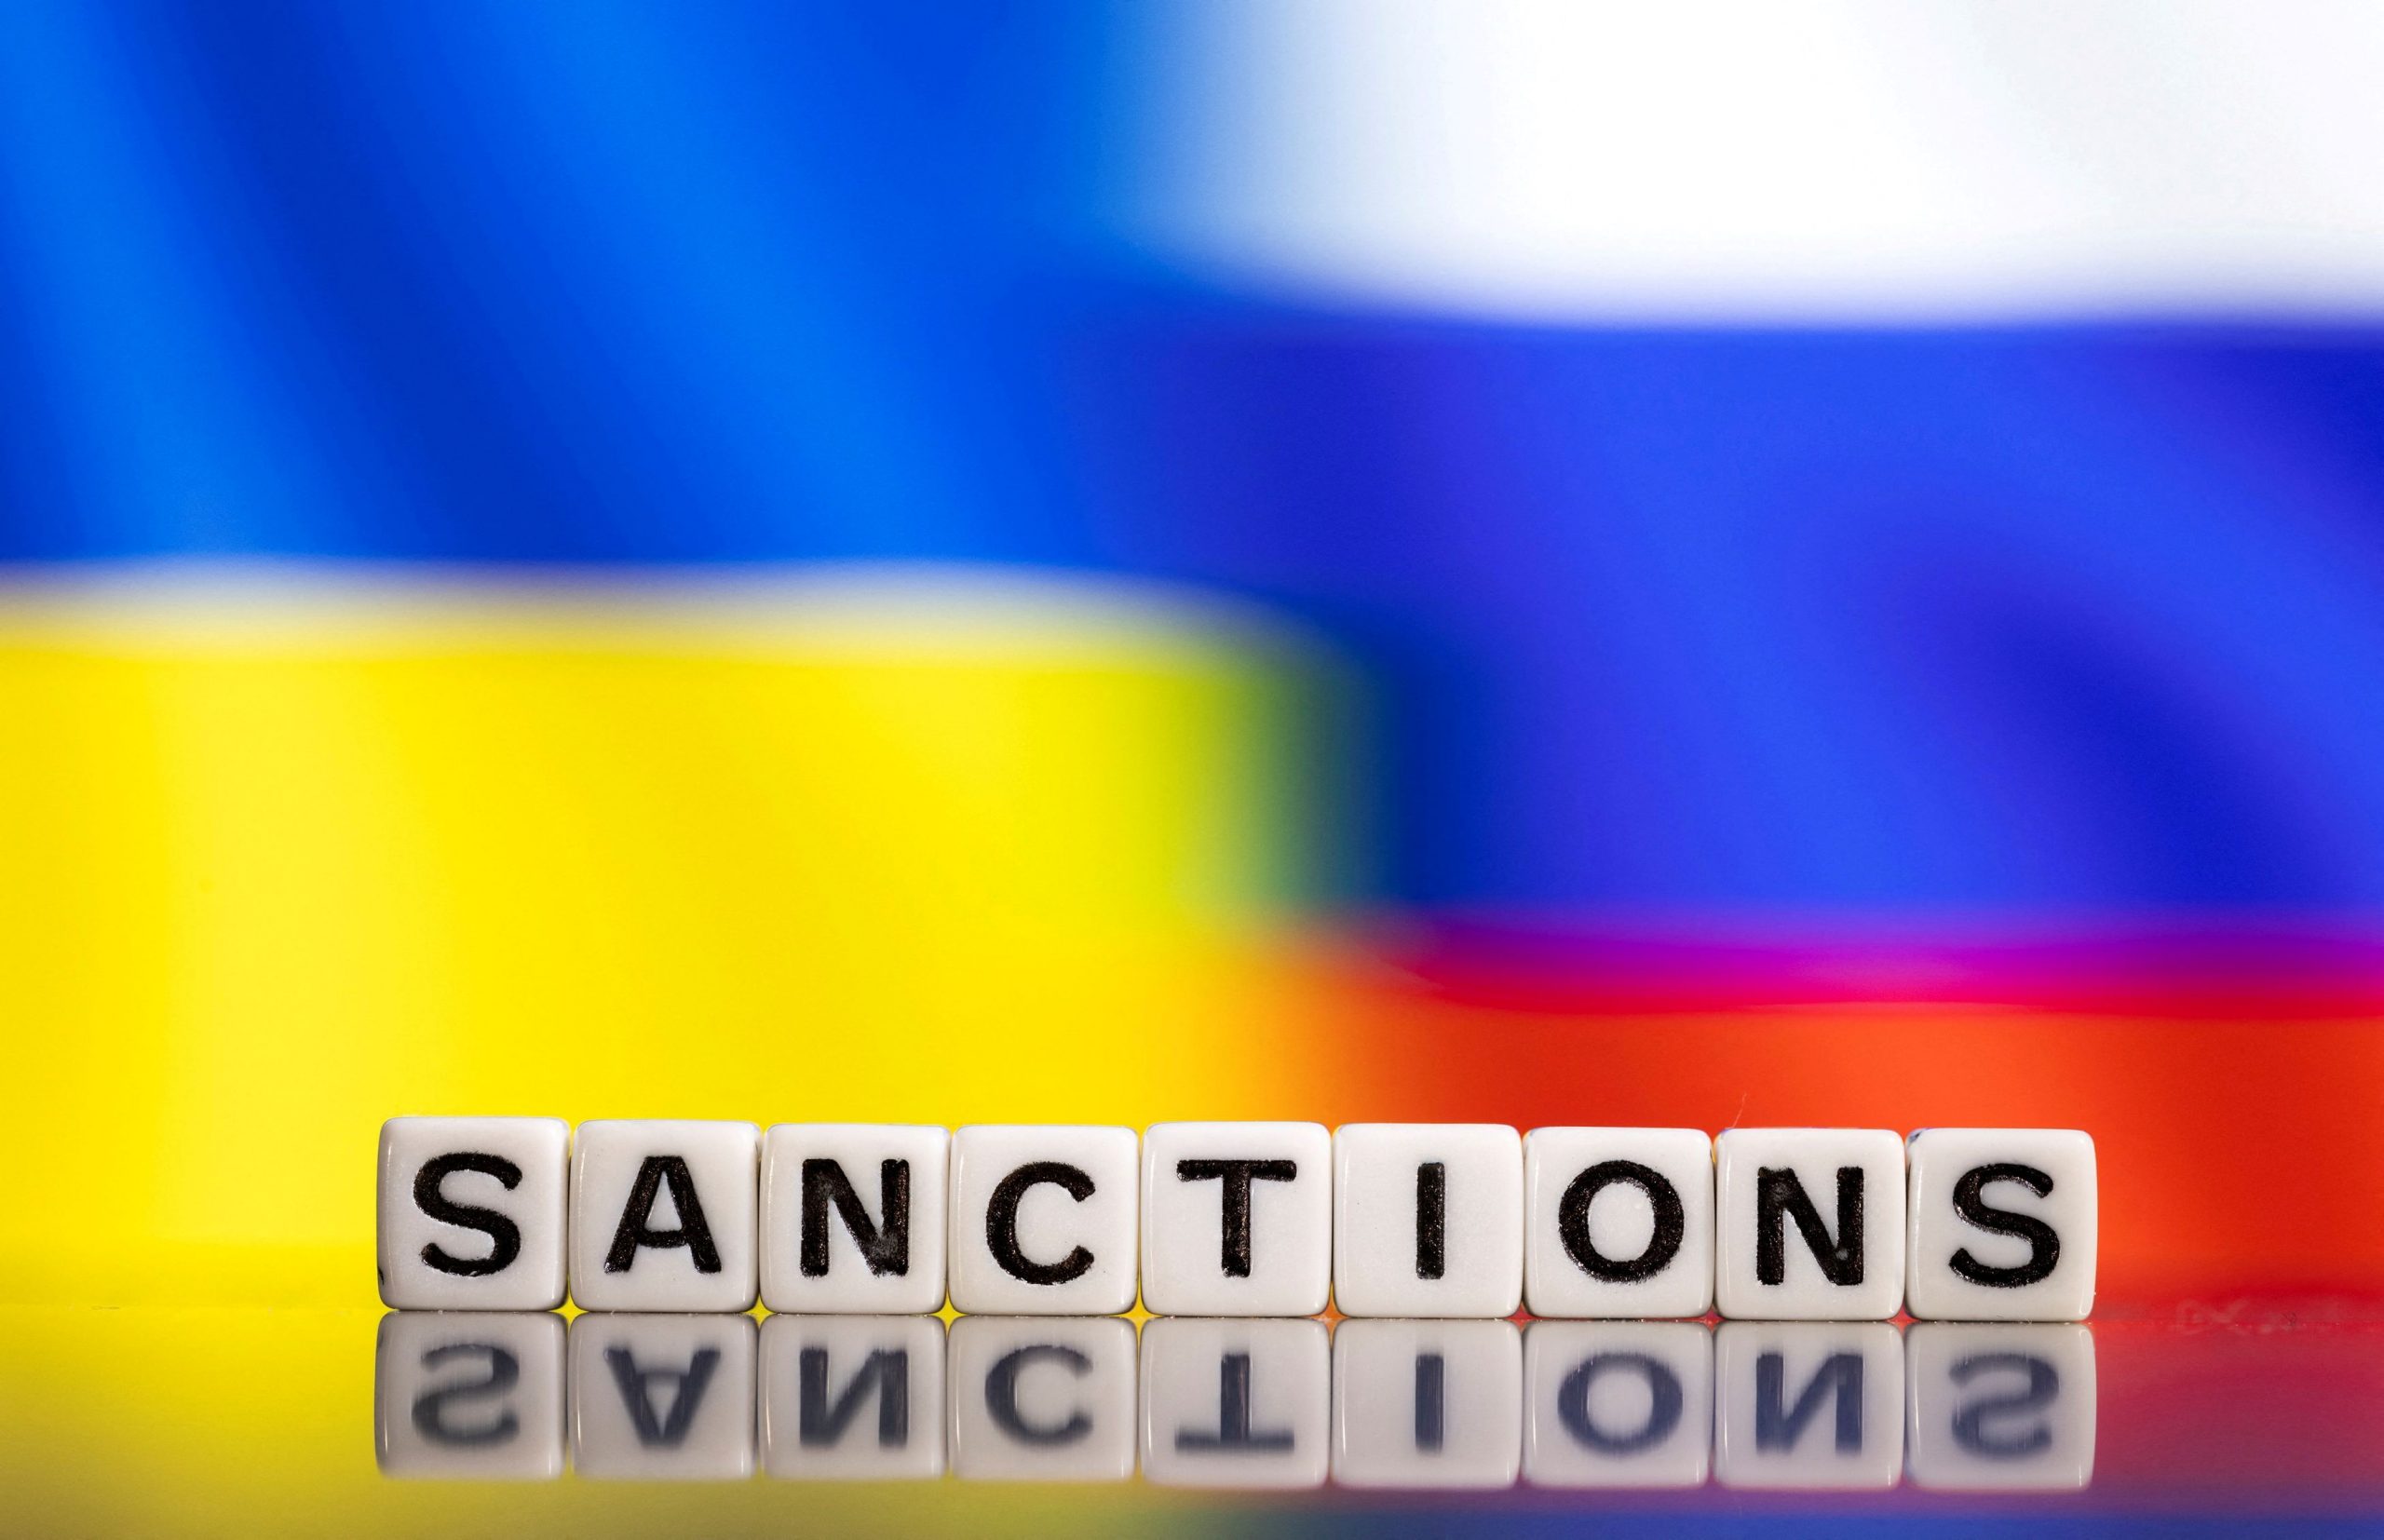 EU Council Passes 12th Package of Sanctions Against Russia- 1,950 Persons and Entities Impacted